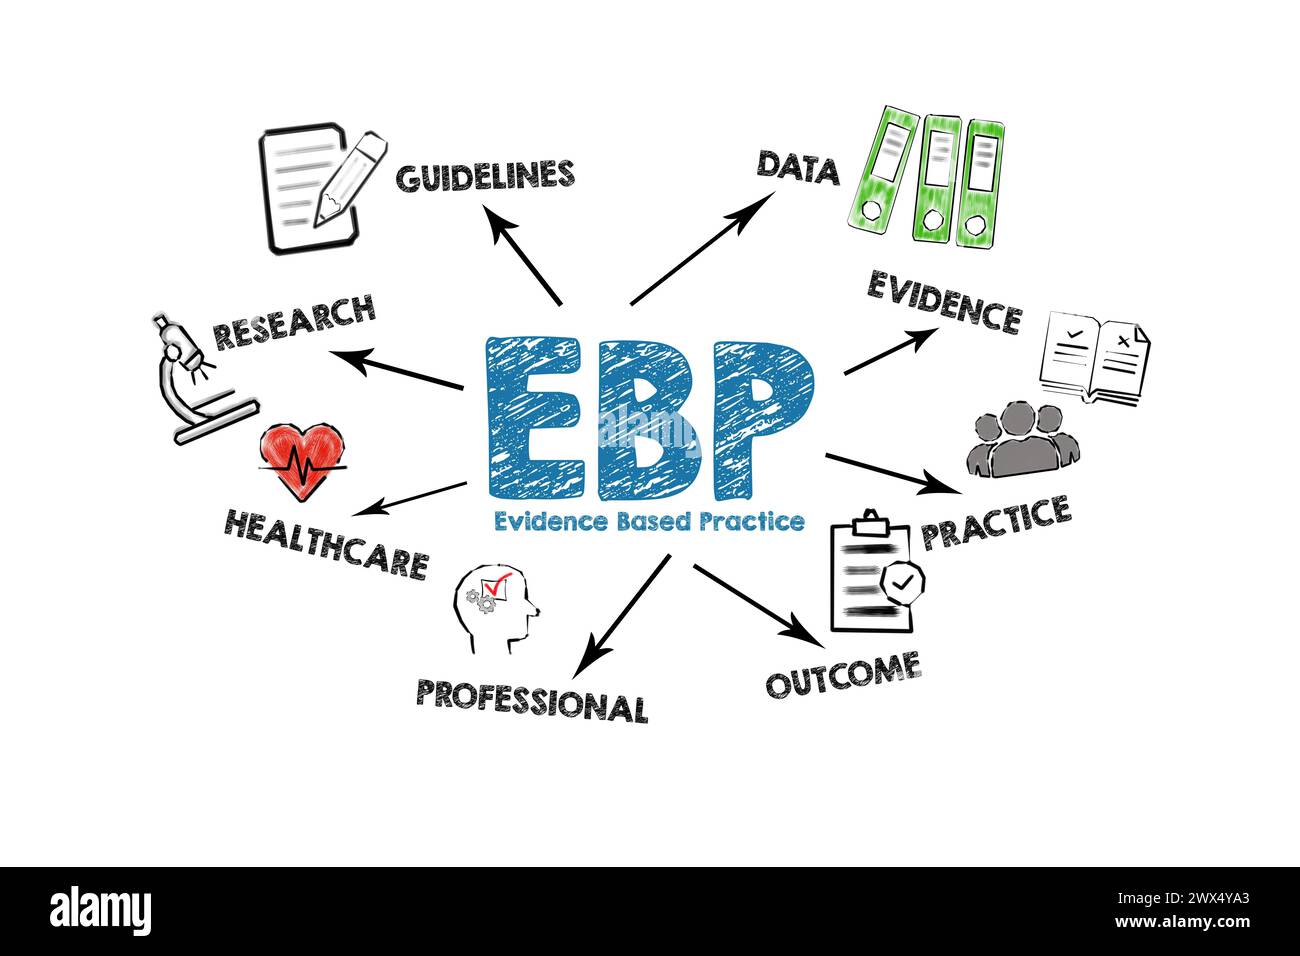 EBP Evidence based practice concept. Illustration with icons, keywords and arrows on a white background. Stock Photo